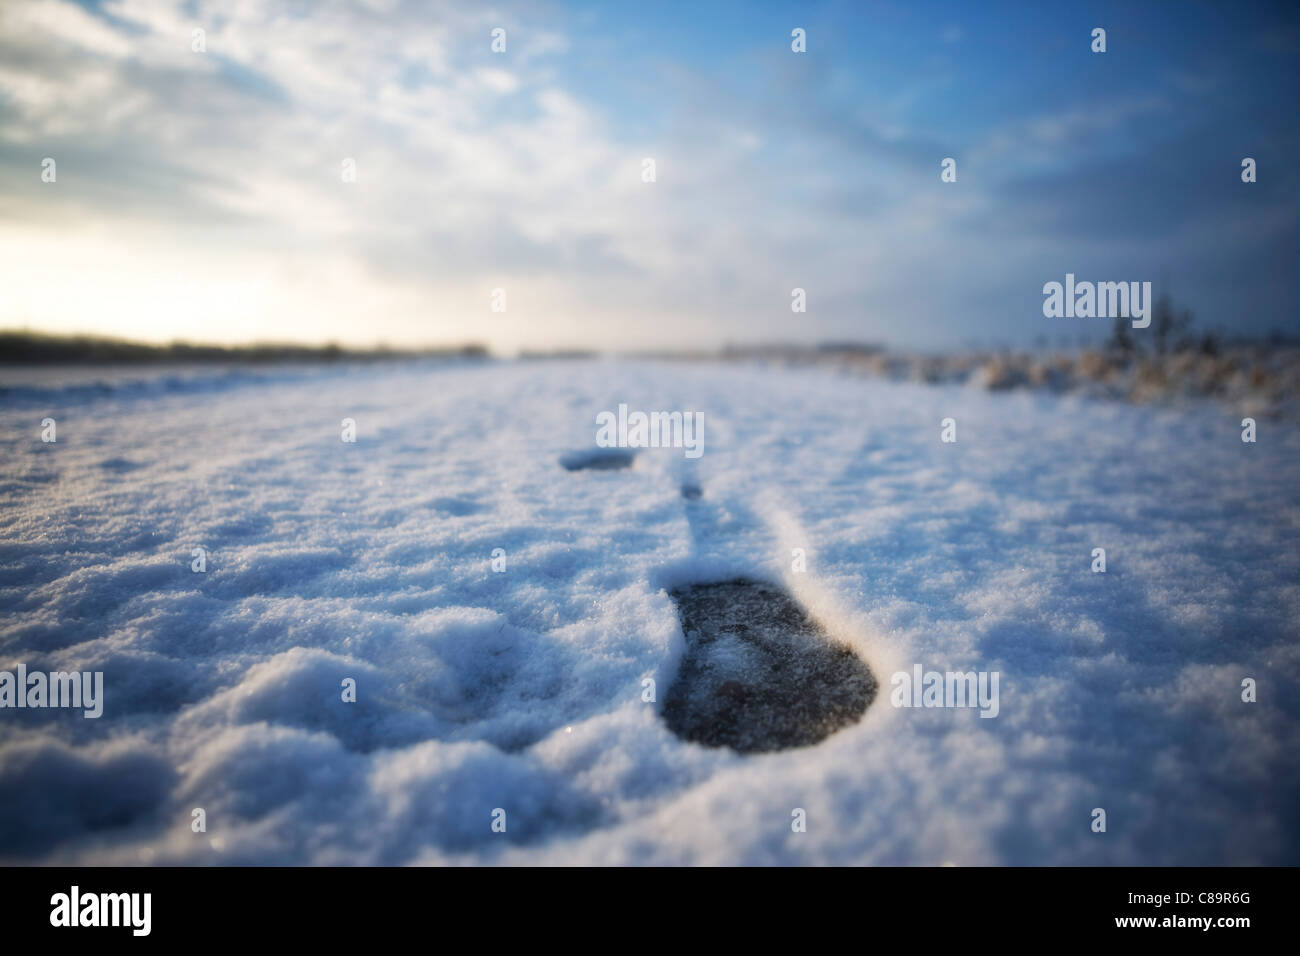 Germany, Close up of footstep in snow Stock Photo